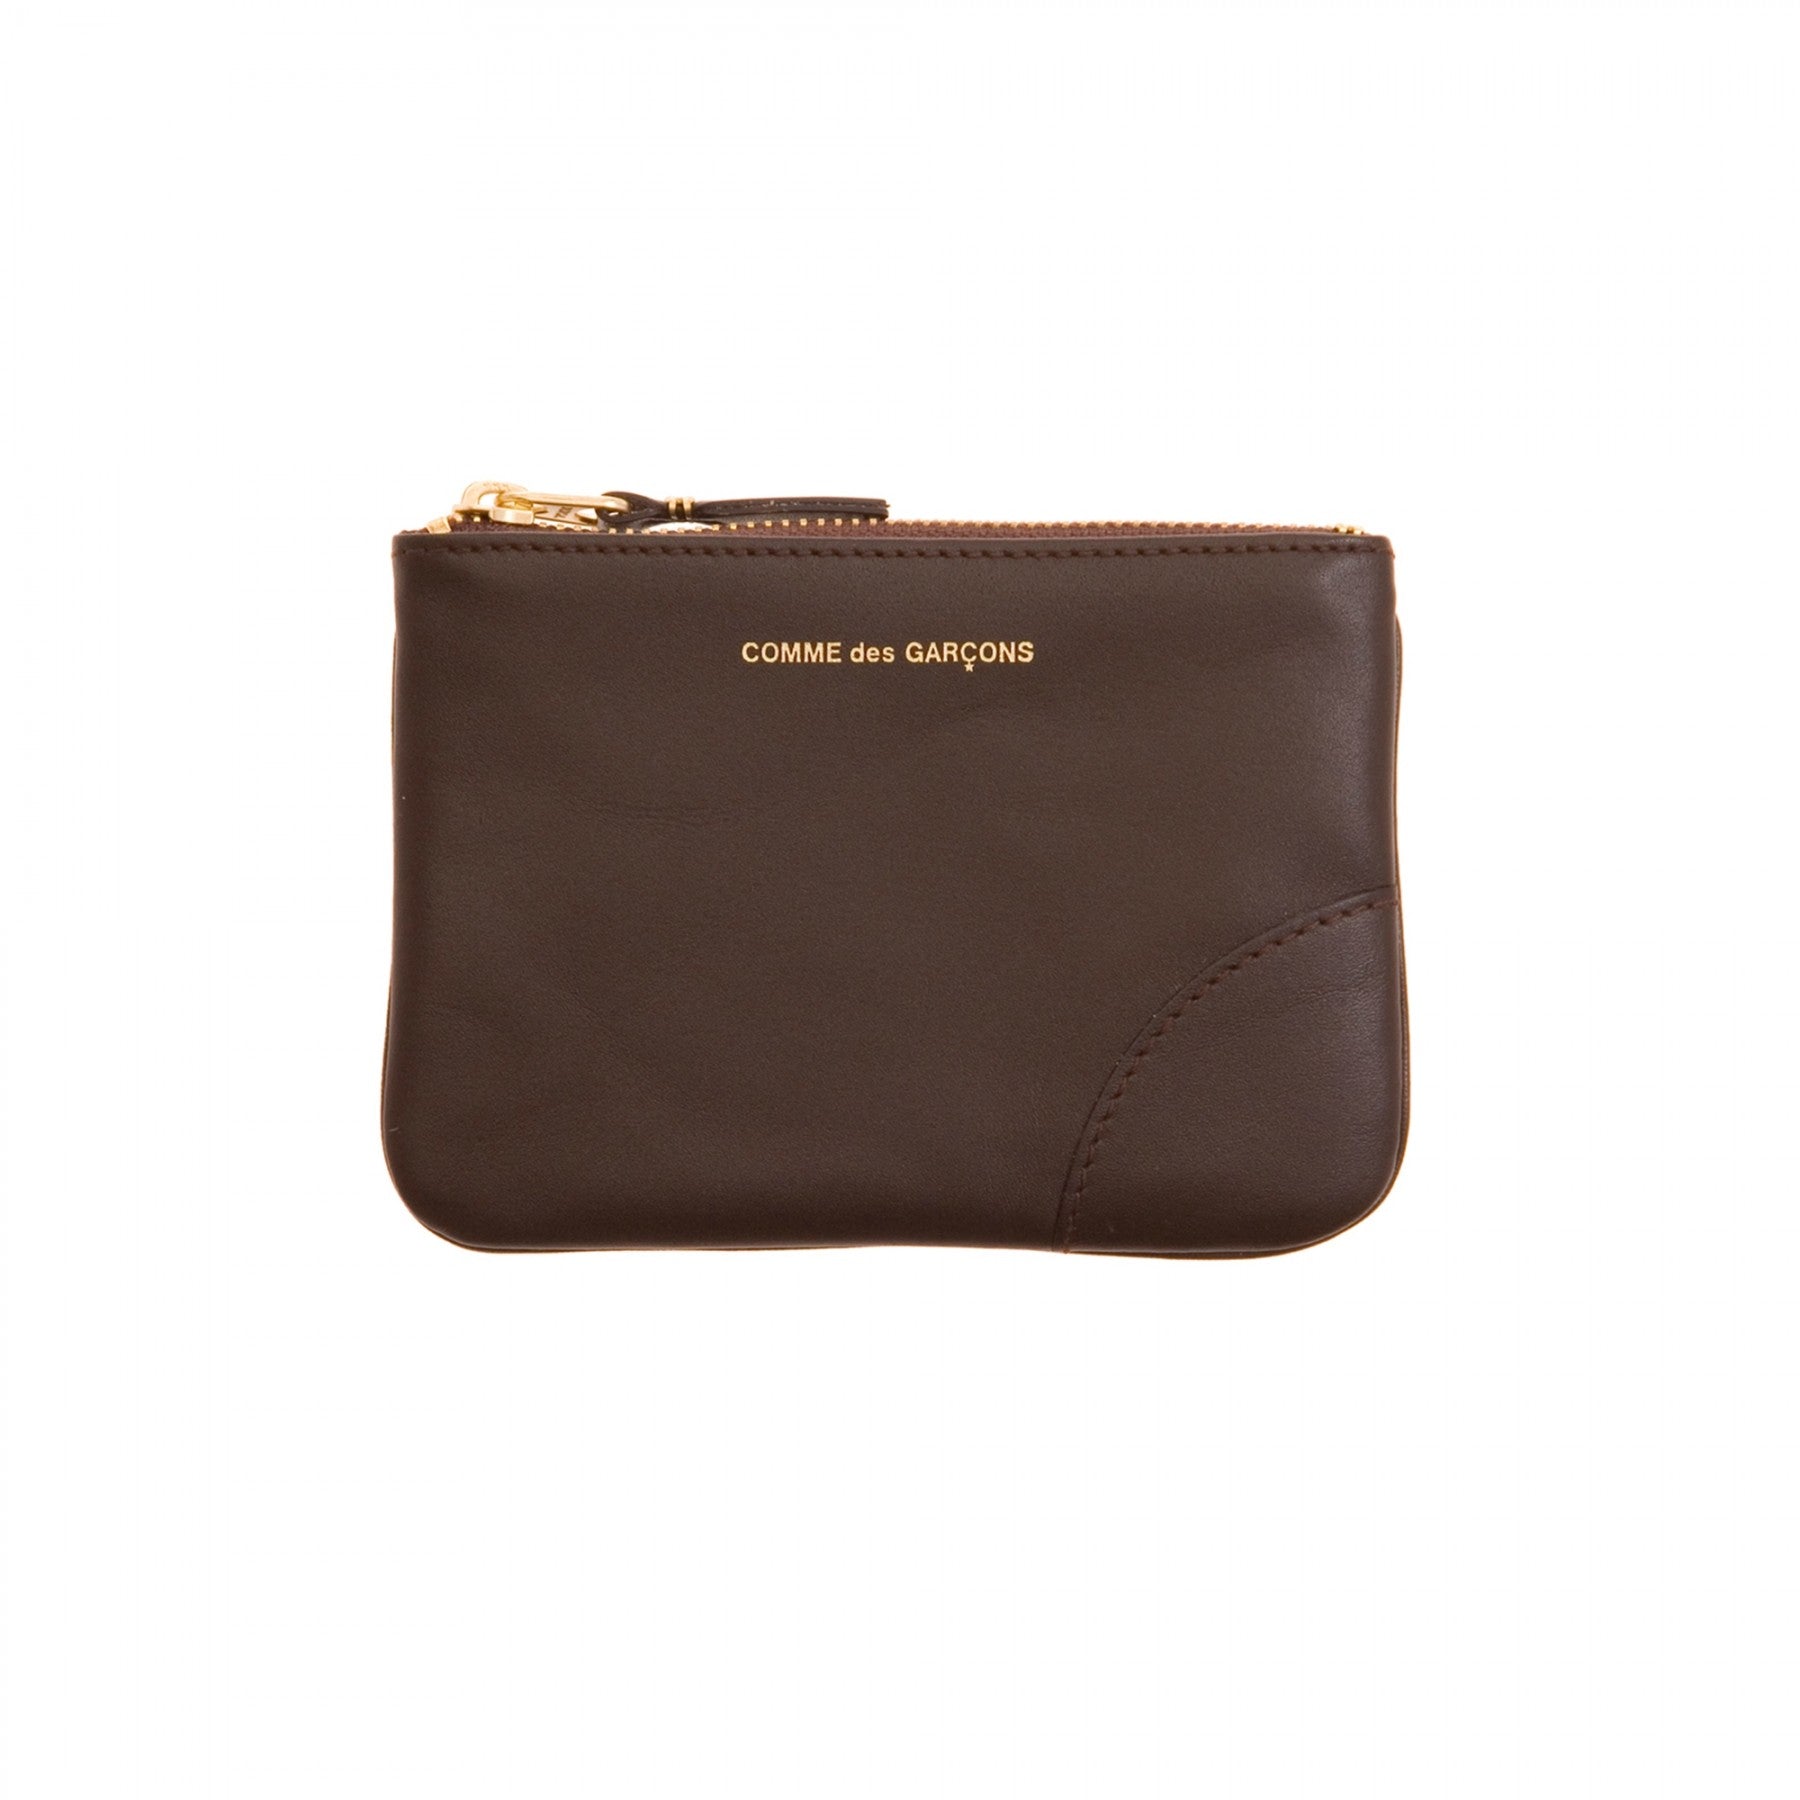 Classic Group Wallet 8100ClassicBR